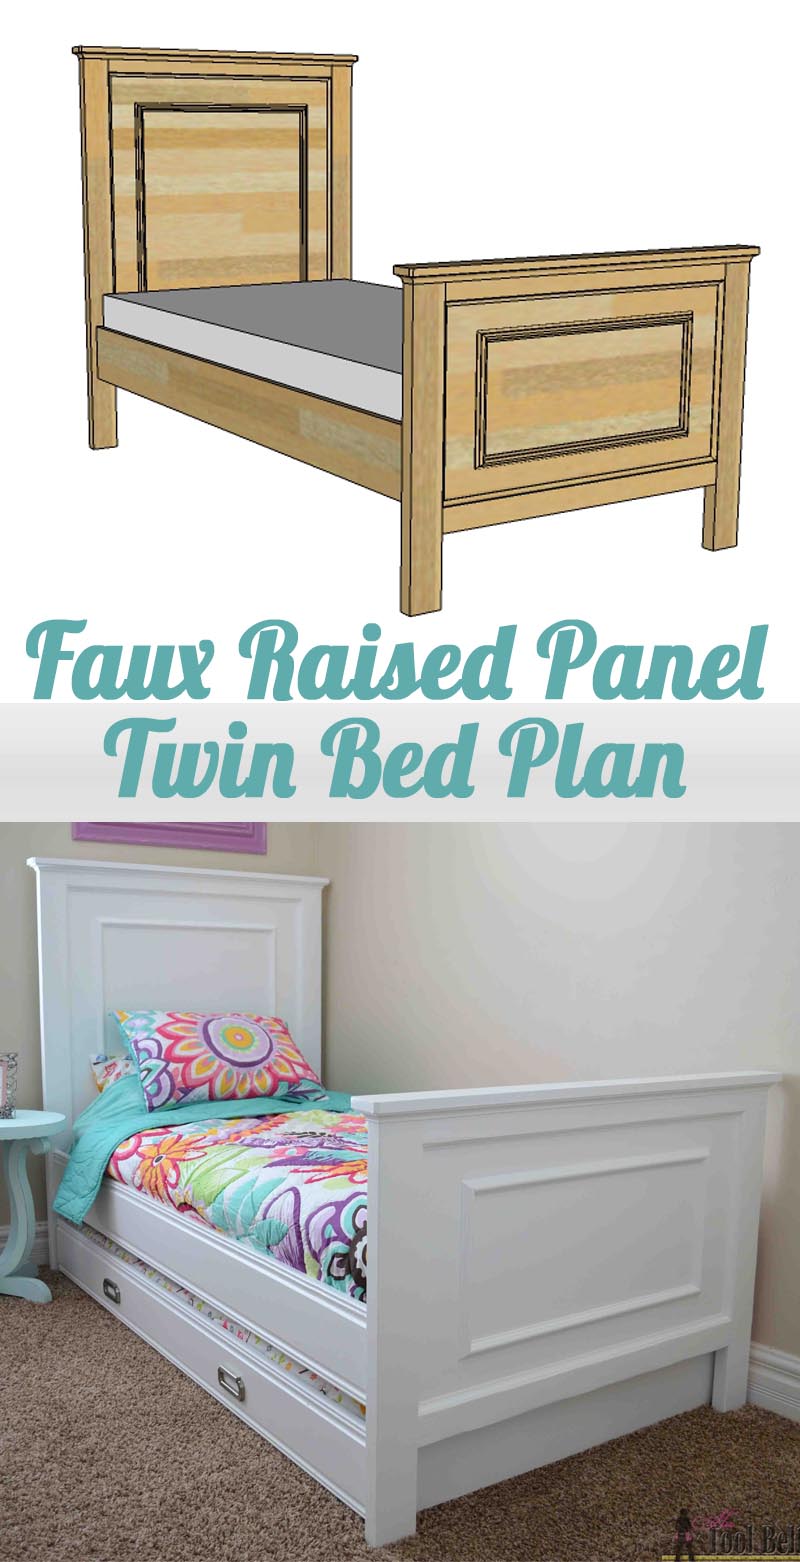 Faux raised panel twin bed plan - Her Tool Belt